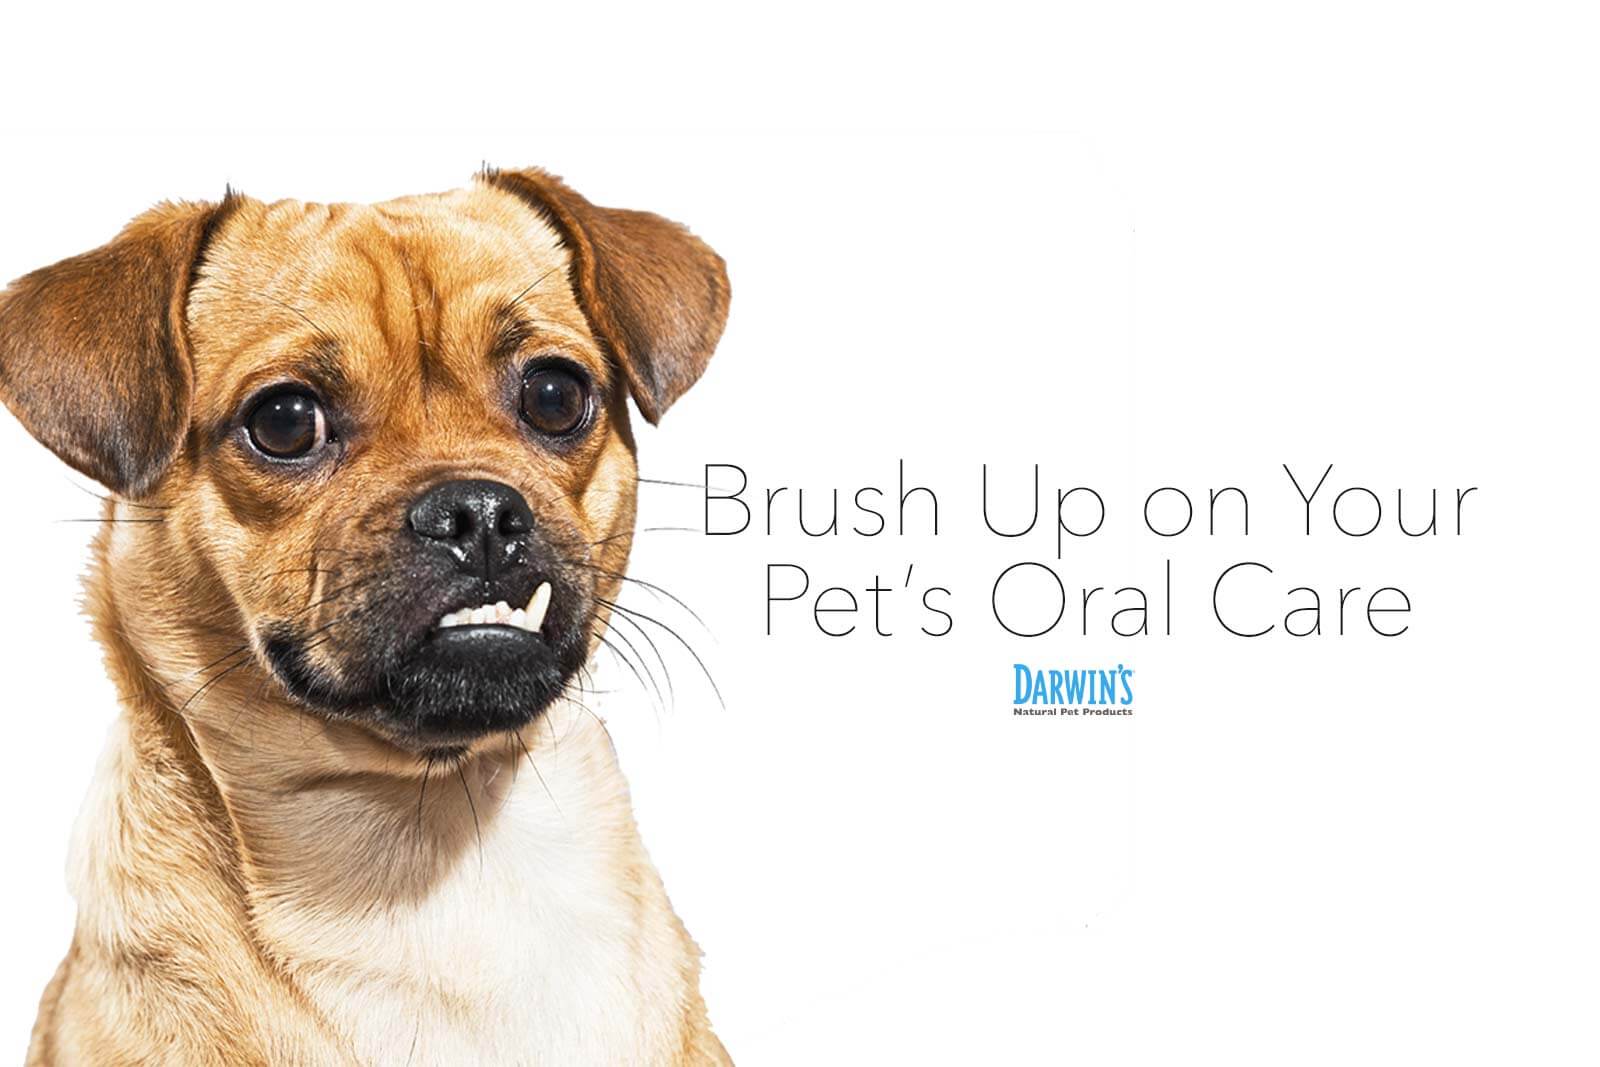 It’s Time To Brush Up On Your Pet’s Oral Care